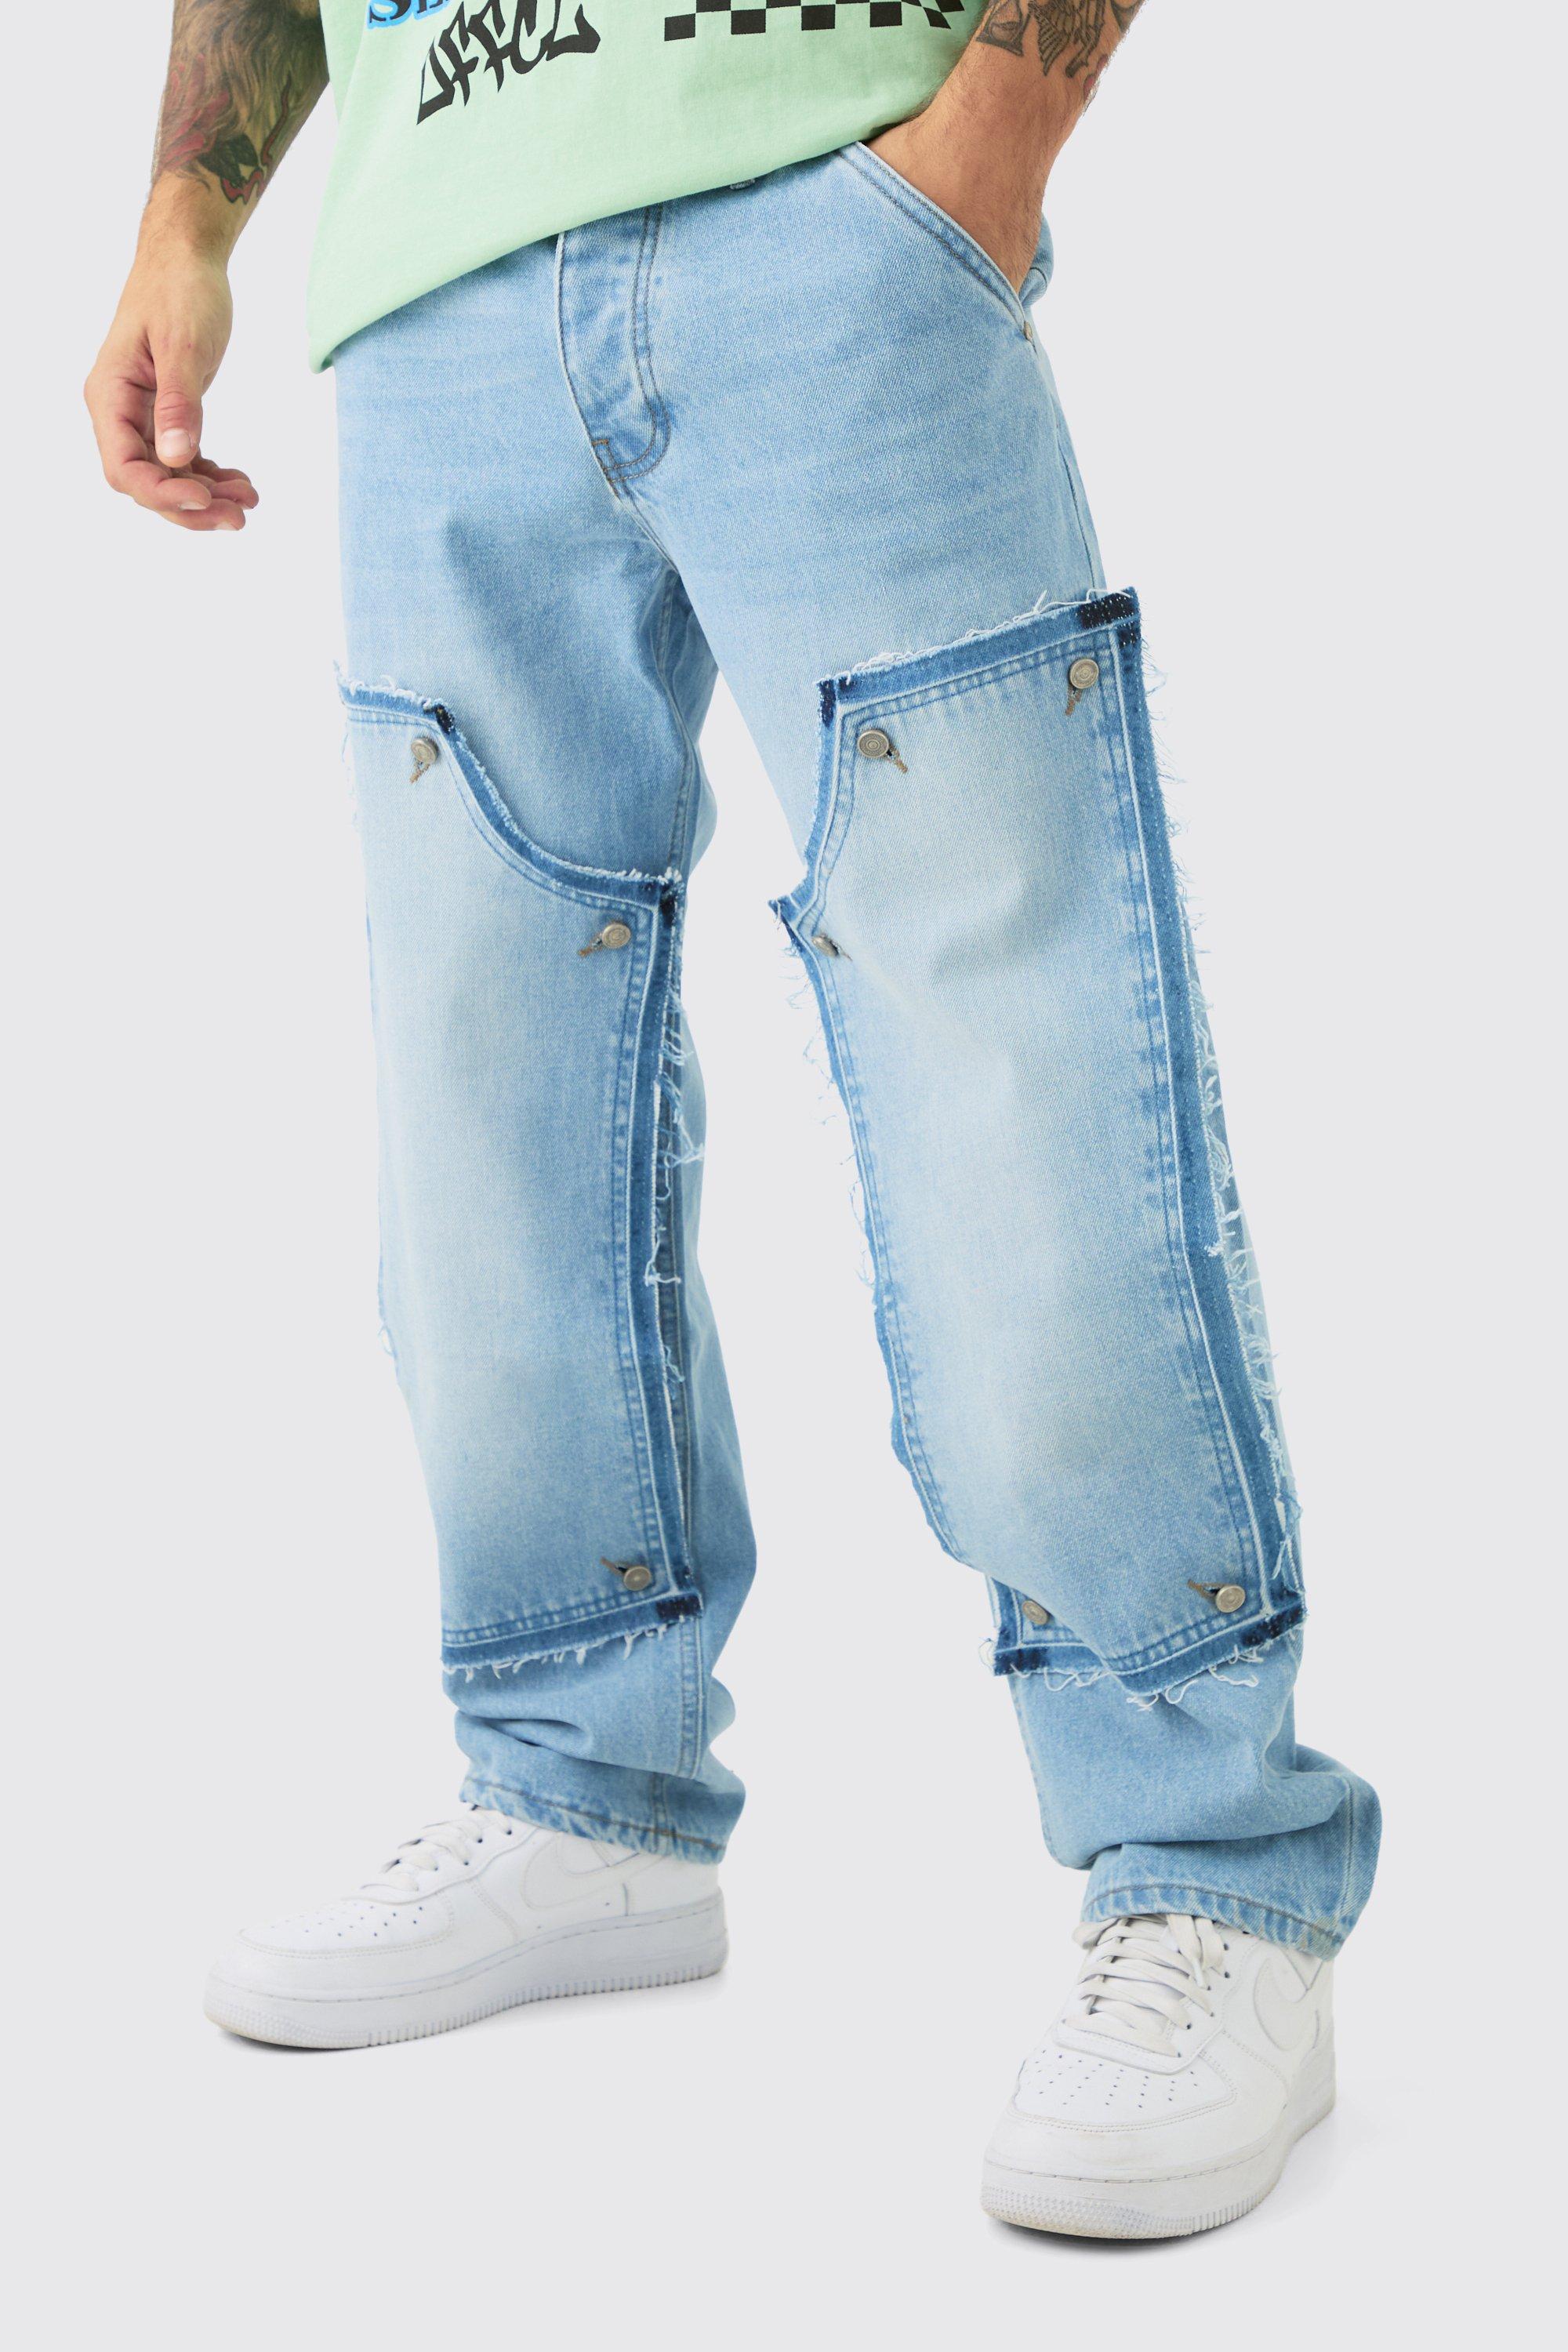 Image of Relaxed Rigid Removable Carpenter Panel Jeans In Light Blue, Azzurro